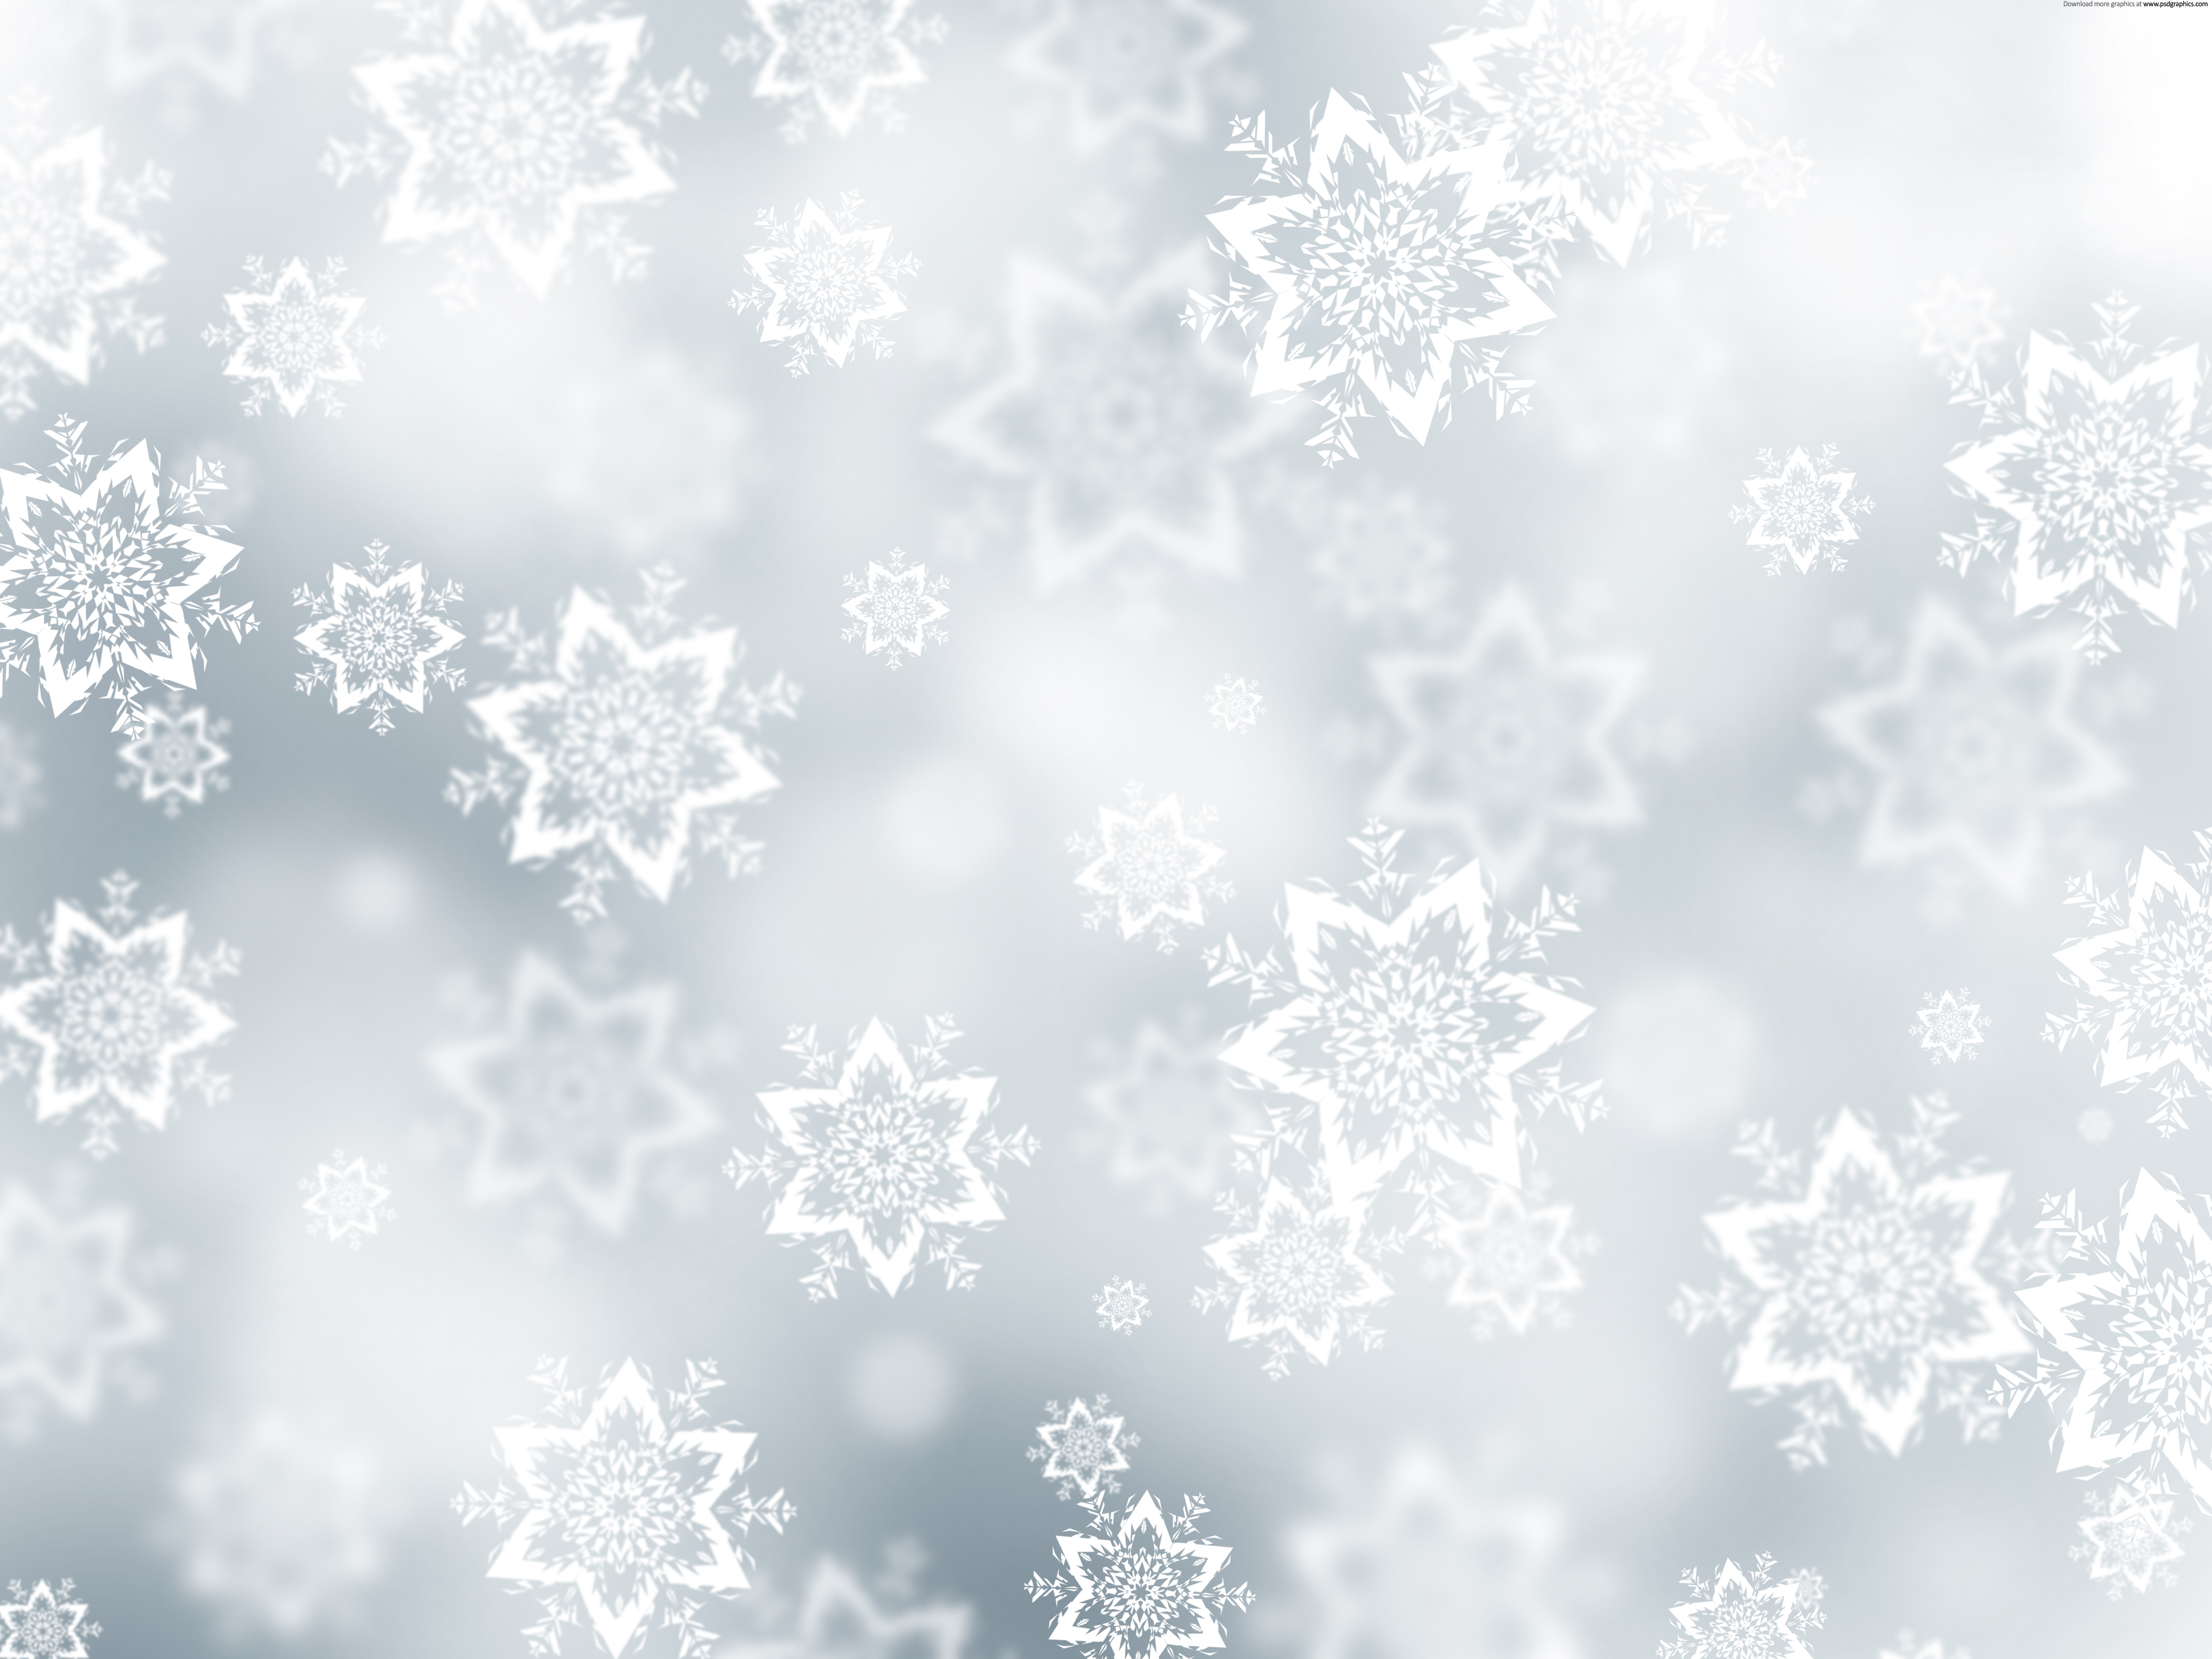 Falling Snow Christmas Backgrounds